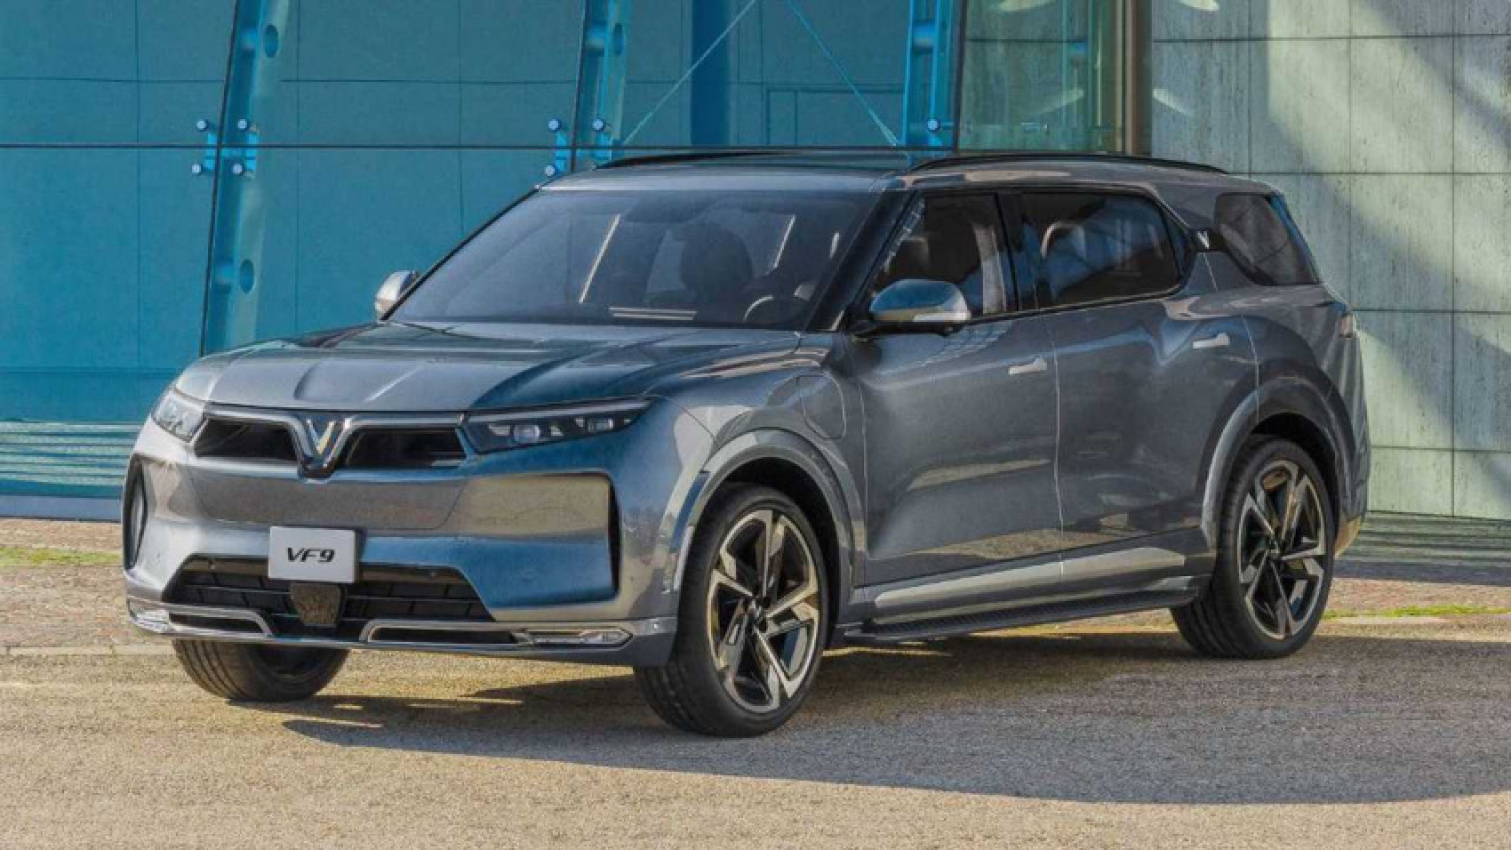 autos, cars, evs, vinfast, vinfast shows vf8, vf9 electric suvs coming to us in 2022